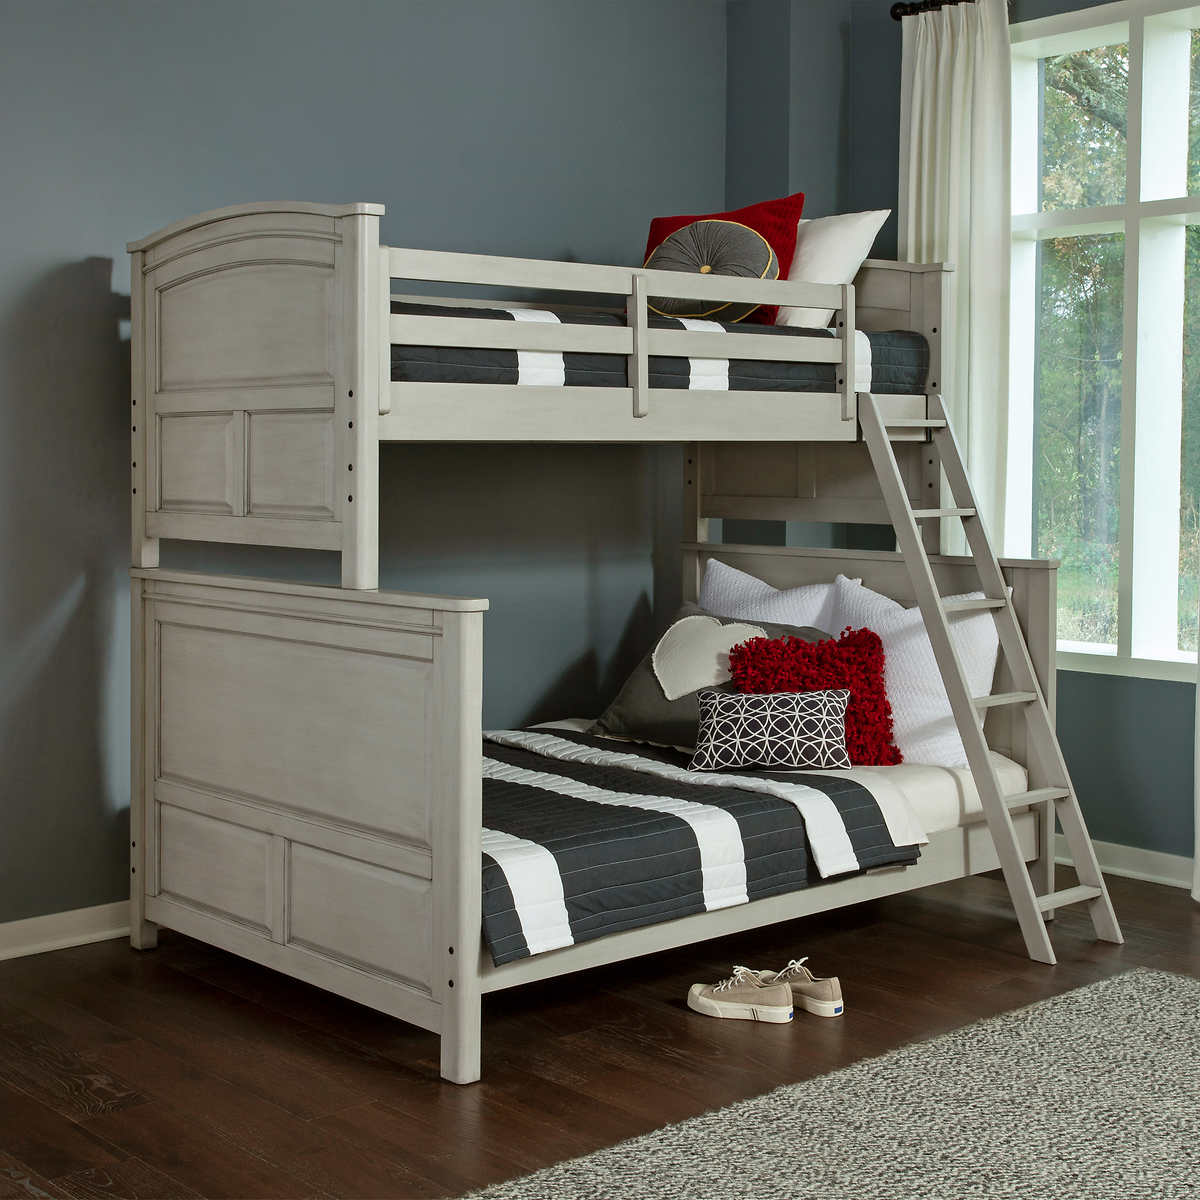 Wingate Twin Over Full Bunk Bed Costco, Full Size Bunk Beds That Come Apart